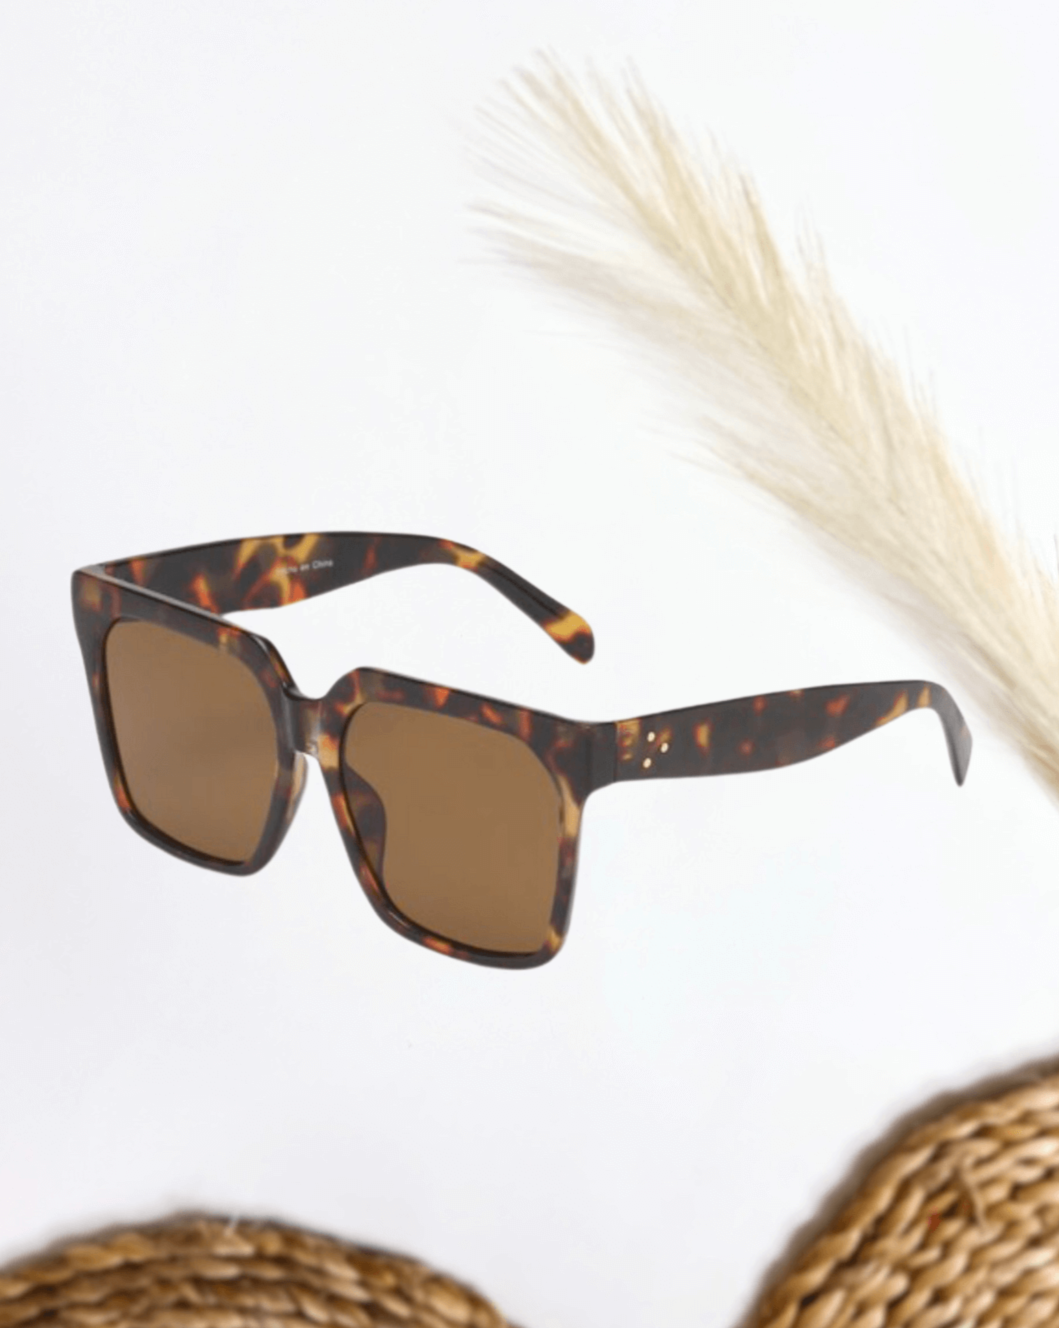 Oversized Square Flat Top Sunglasses in Desert Tortoise Frame Material: Plastic Lens Material: PC 100% UVA and UVB Protection One Size